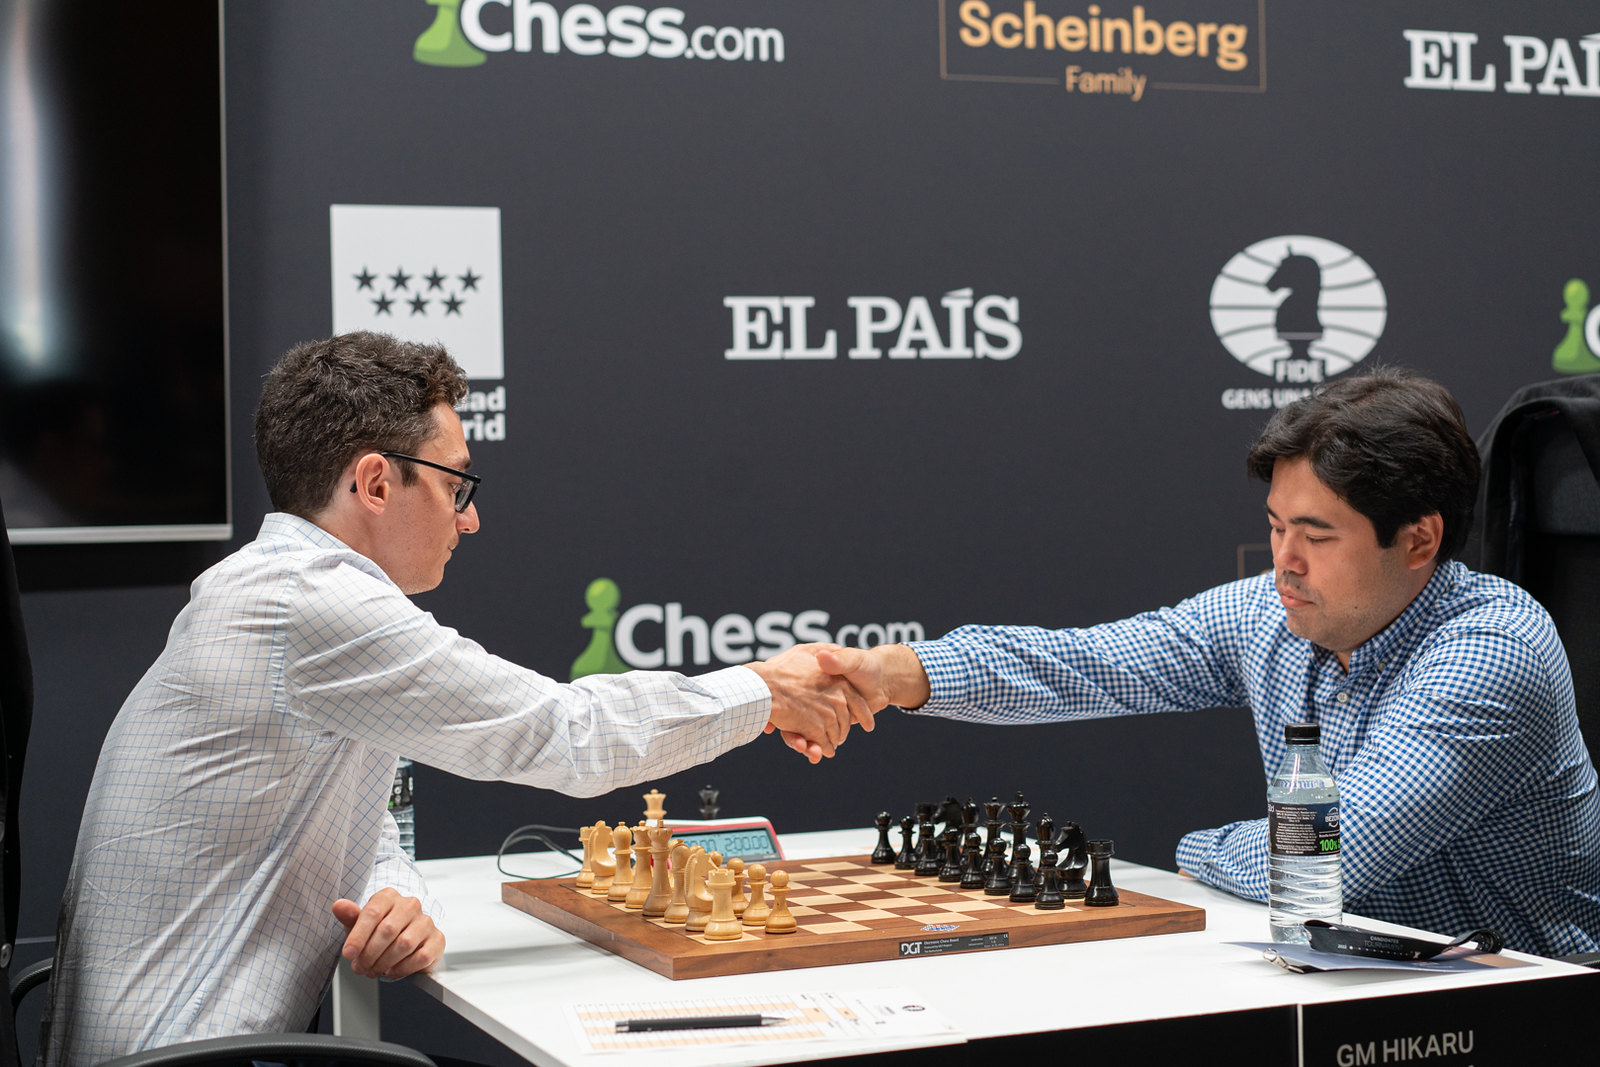 Caruana and Nepomniachtchi lead the 2022 Candidates Tournament